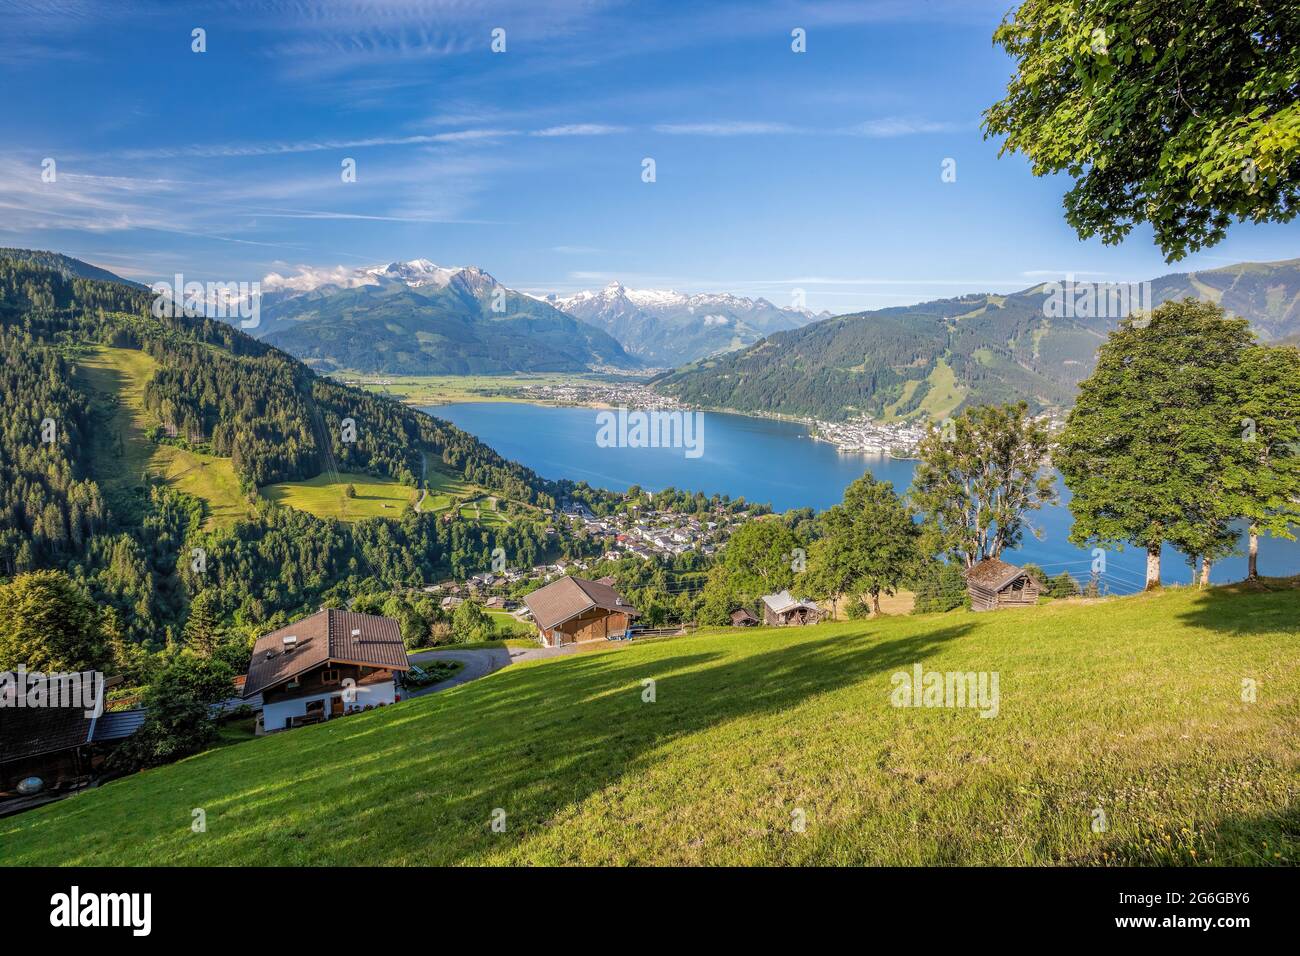 The town of Zell am See in the Zell am See-Kaprun region, Austrian Alps, Salcburger land Stock Photo